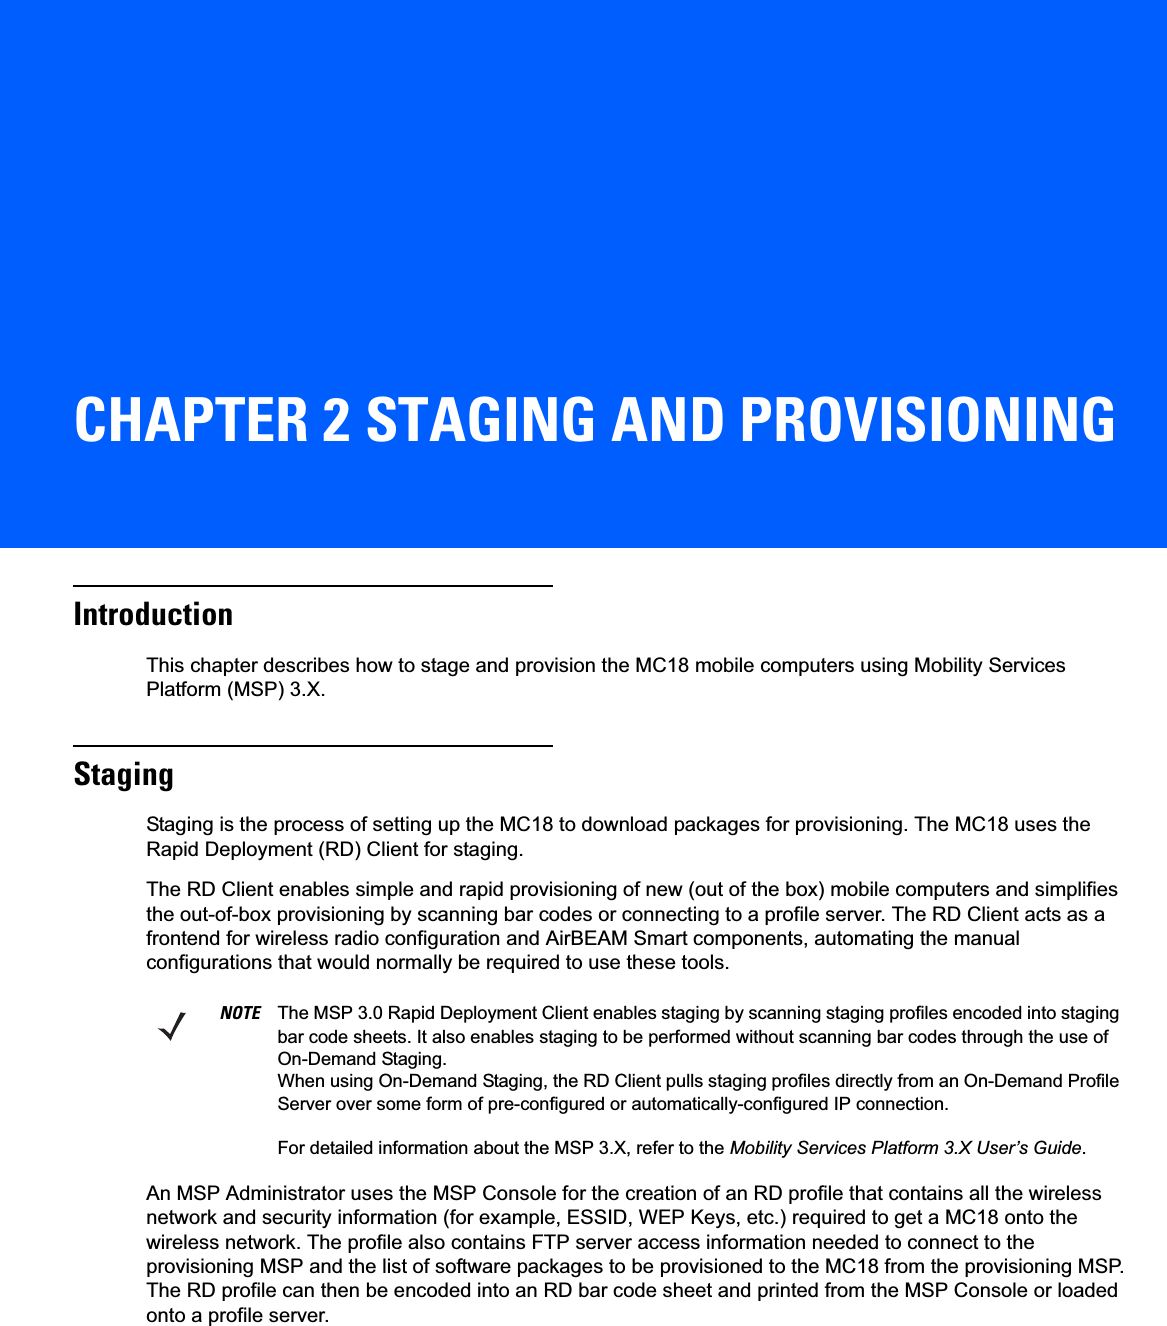 CHAPTER 2 STAGING AND PROVISIONINGIntroductionThis chapter describes how to stage and provision the MC18 mobile computers using Mobility Services Platform (MSP) 3.X.StagingStaging is the process of setting up the MC18 to download packages for provisioning. The MC18 uses the Rapid Deployment (RD) Client for staging.The RD Client enables simple and rapid provisioning of new (out of the box) mobile computers and simplifies the out-of-box provisioning by scanning bar codes or connecting to a profile server. The RD Client acts as a frontend for wireless radio configuration and AirBEAM Smart components, automating the manual configurations that would normally be required to use these tools.An MSP Administrator uses the MSP Console for the creation of an RD profile that contains all the wireless network and security information (for example, ESSID, WEP Keys, etc.) required to get a MC18 onto the wireless network. The profile also contains FTP server access information needed to connect to the provisioning MSP and the list of software packages to be provisioned to the MC18 from the provisioning MSP. The RD profile can then be encoded into an RD bar code sheet and printed from the MSP Console or loaded onto a profile server.NOTE The MSP 3.0 Rapid Deployment Client enables staging by scanning staging profiles encoded into staging bar code sheets. It also enables staging to be performed without scanning bar codes through the use of On-Demand Staging.When using On-Demand Staging, the RD Client pulls staging profiles directly from an On-Demand Profile Server over some form of pre-configured or automatically-configured IP connection.For detailed information about the MSP 3.X, refer to the Mobility Services Platform 3.X User’s Guide.